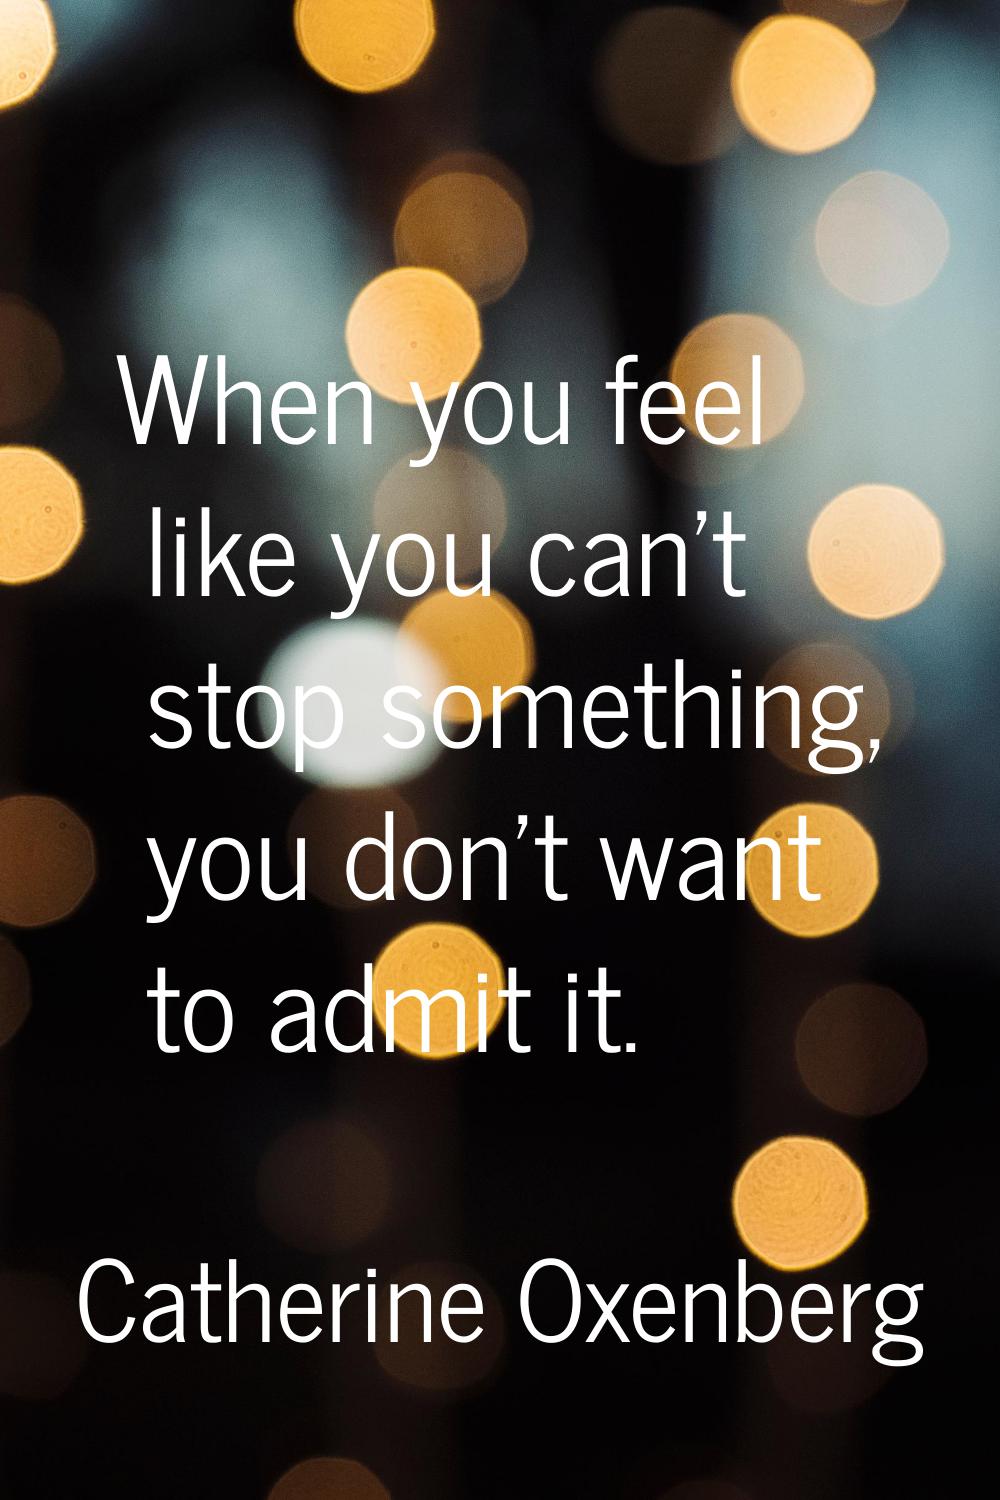 When you feel like you can't stop something, you don't want to admit it.